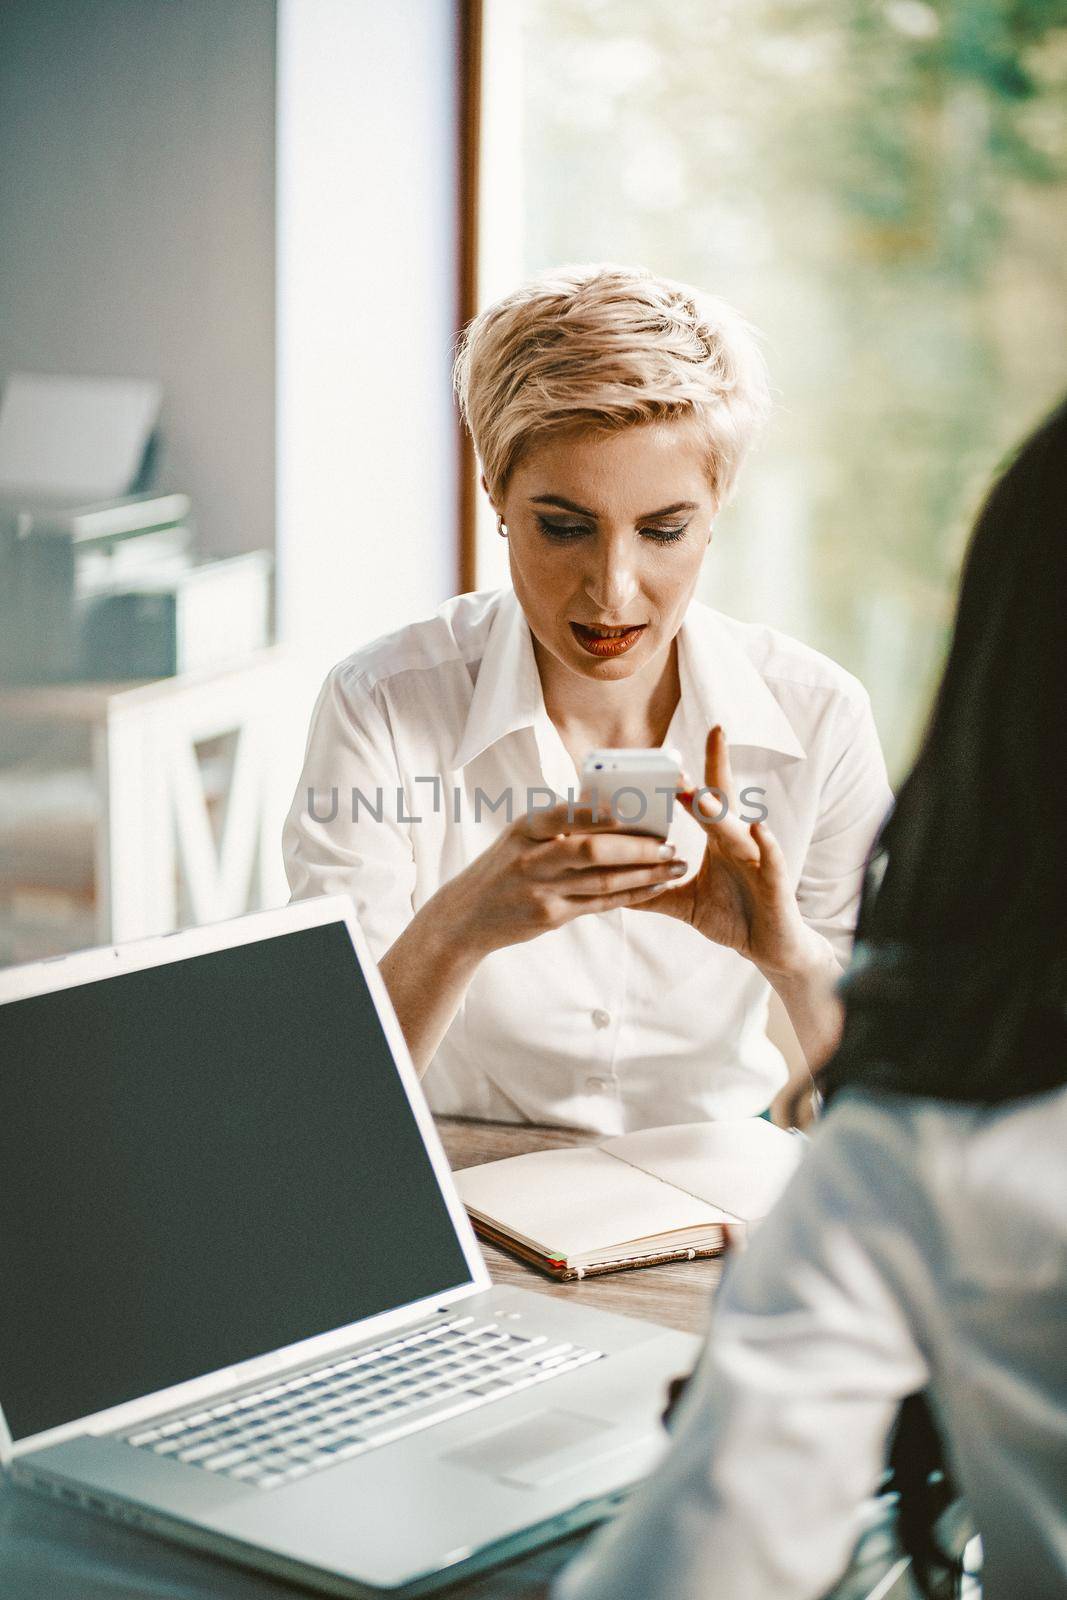 Focused Business Woman Uses Her Phone, Portrait Of Blonde Businesswoman In White Blouse Typing At Mobile Phone During Meeting While Sitting At Table With Opened Notepad And Laptop On It, Toned Image